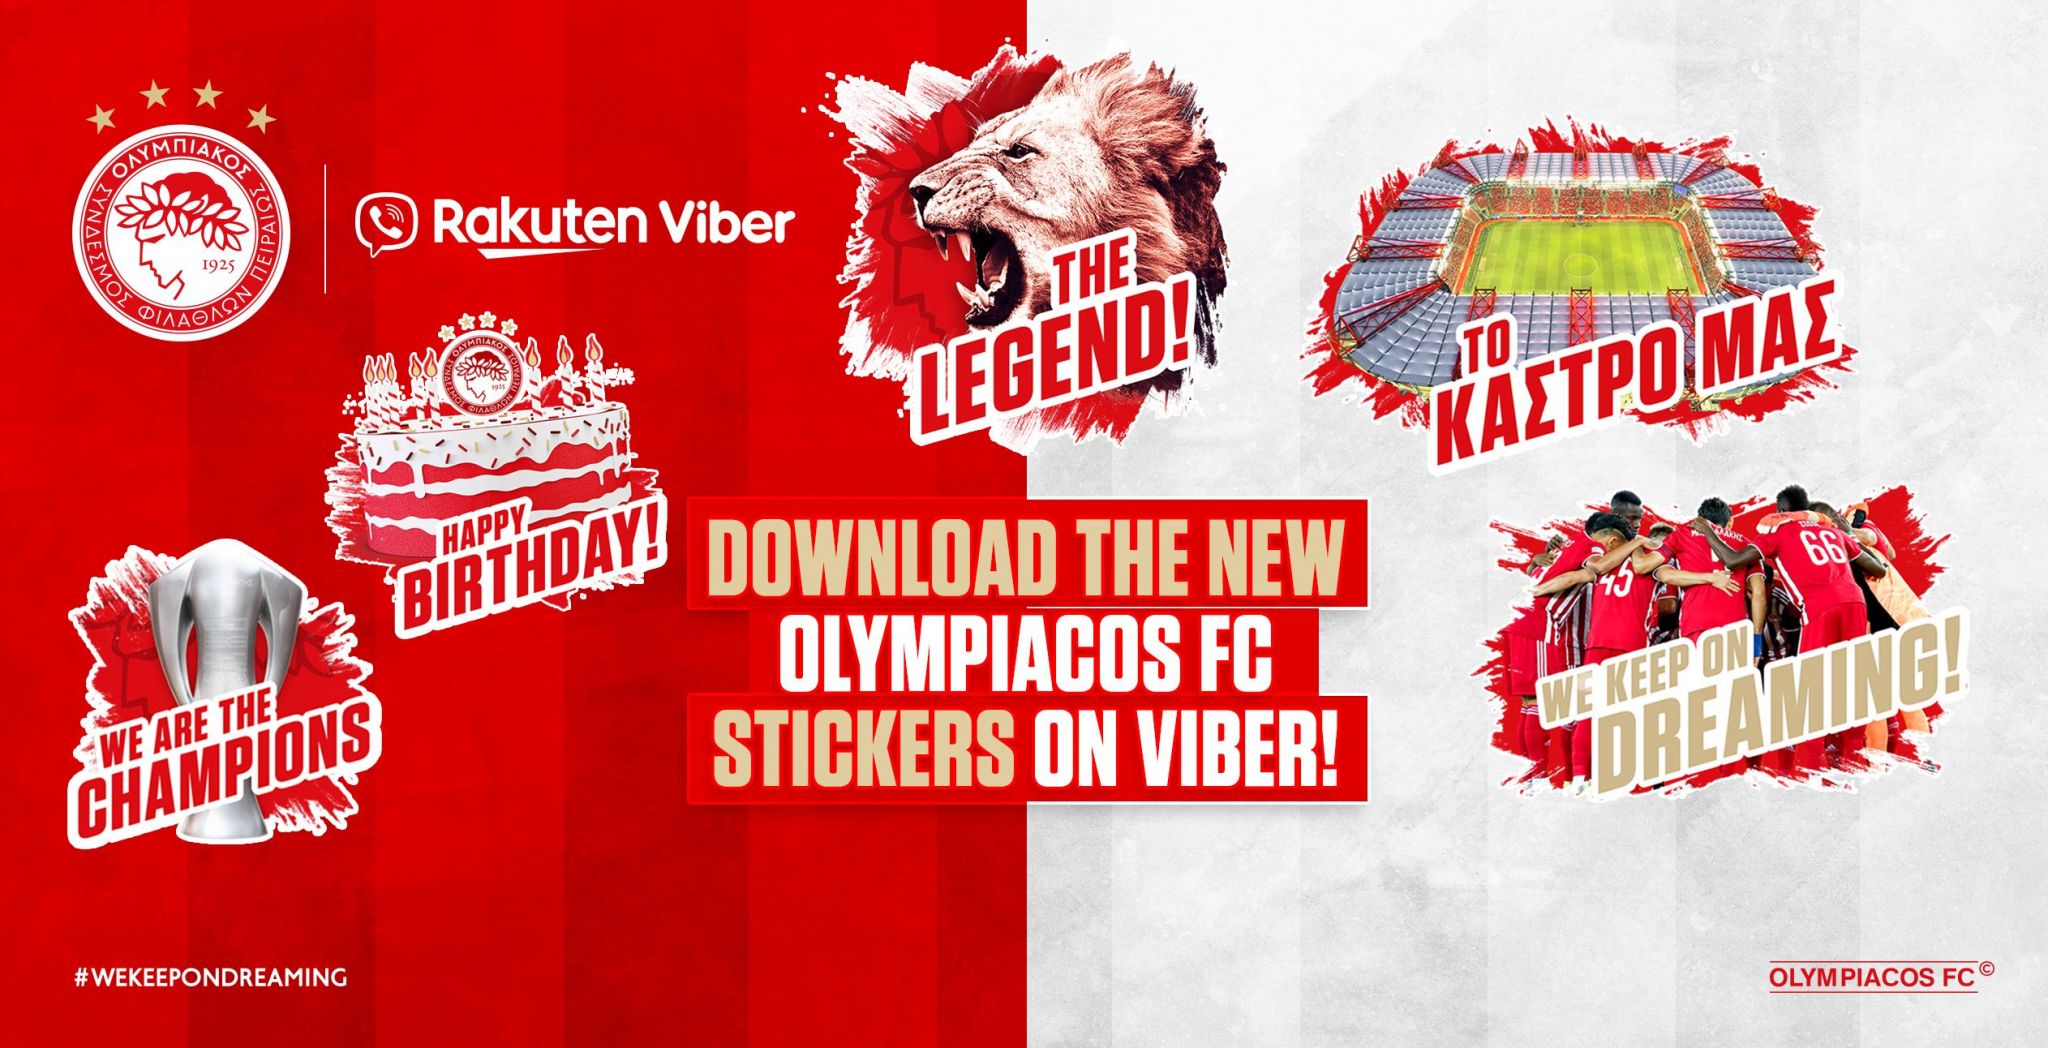 Olympiacos turns its top players into digital stars on Viber